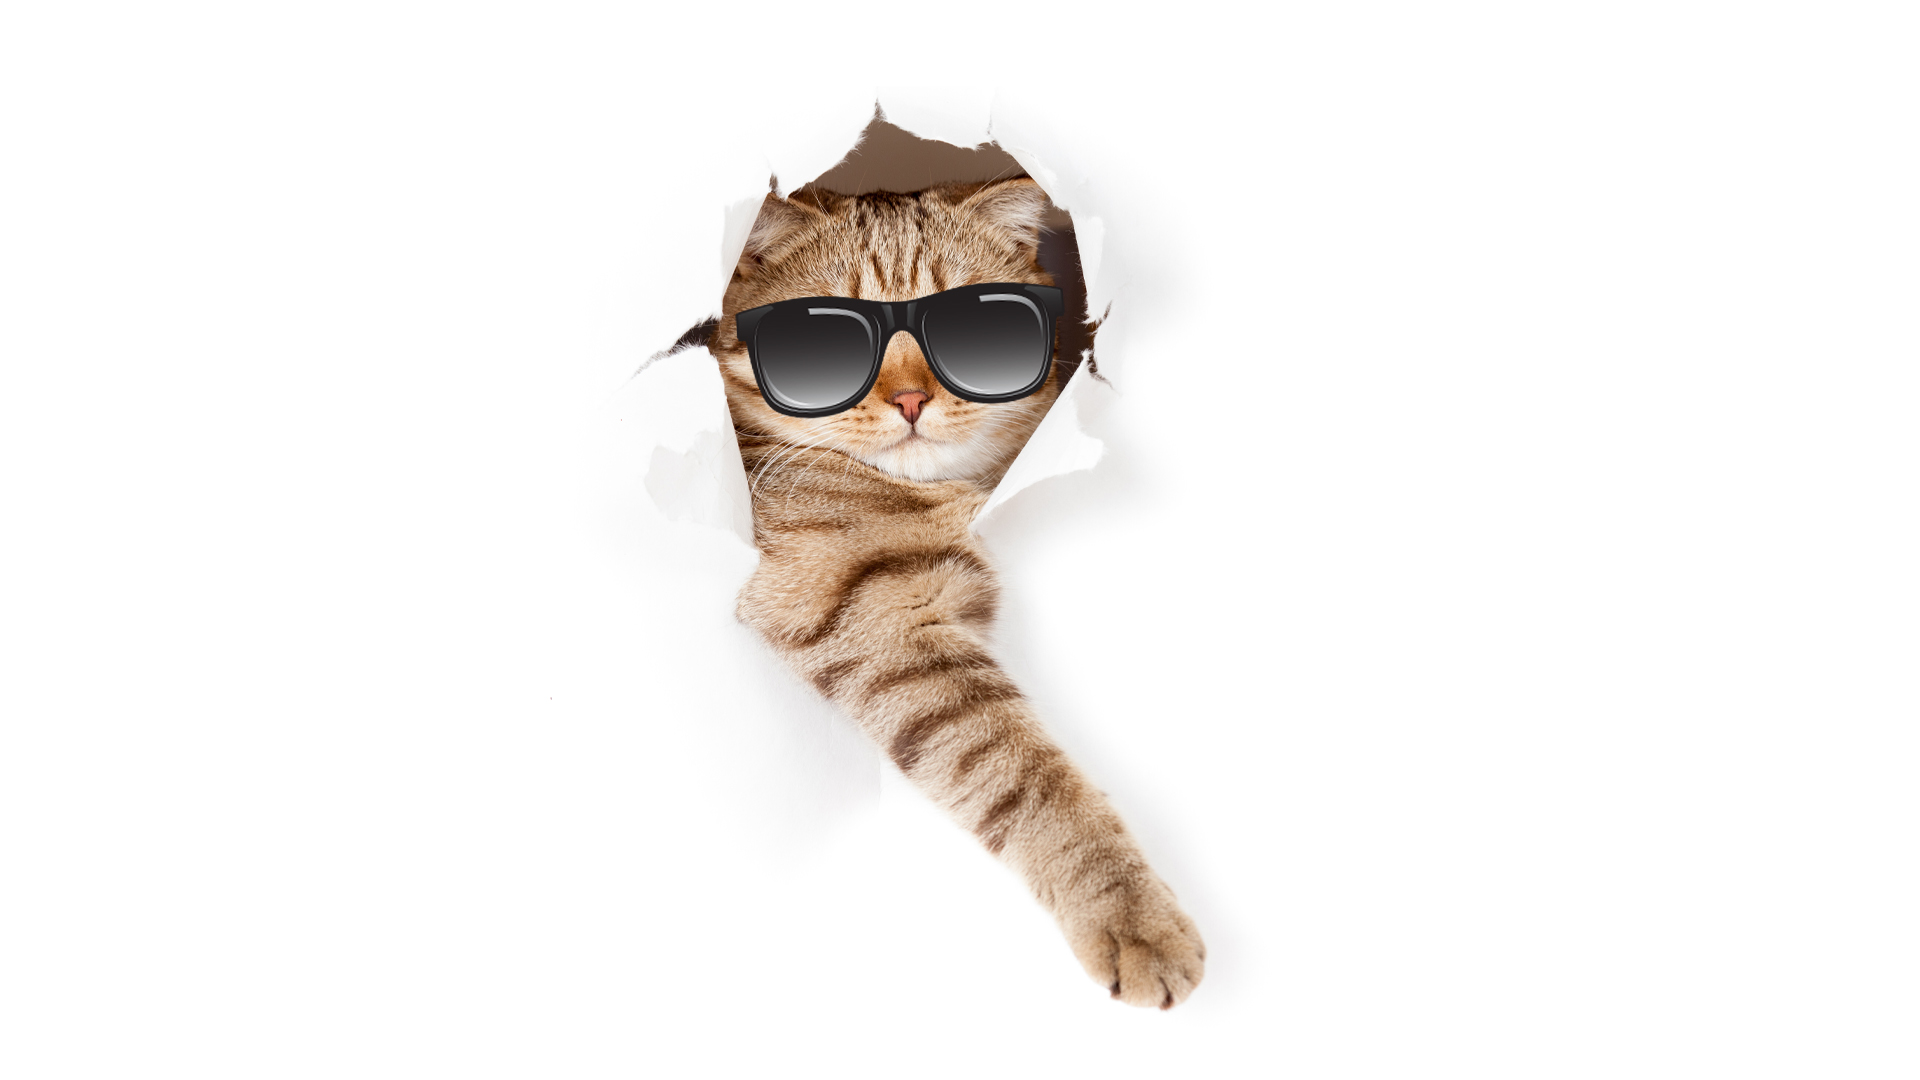 A cat wearing sunglasses tearing through a sheet of paper